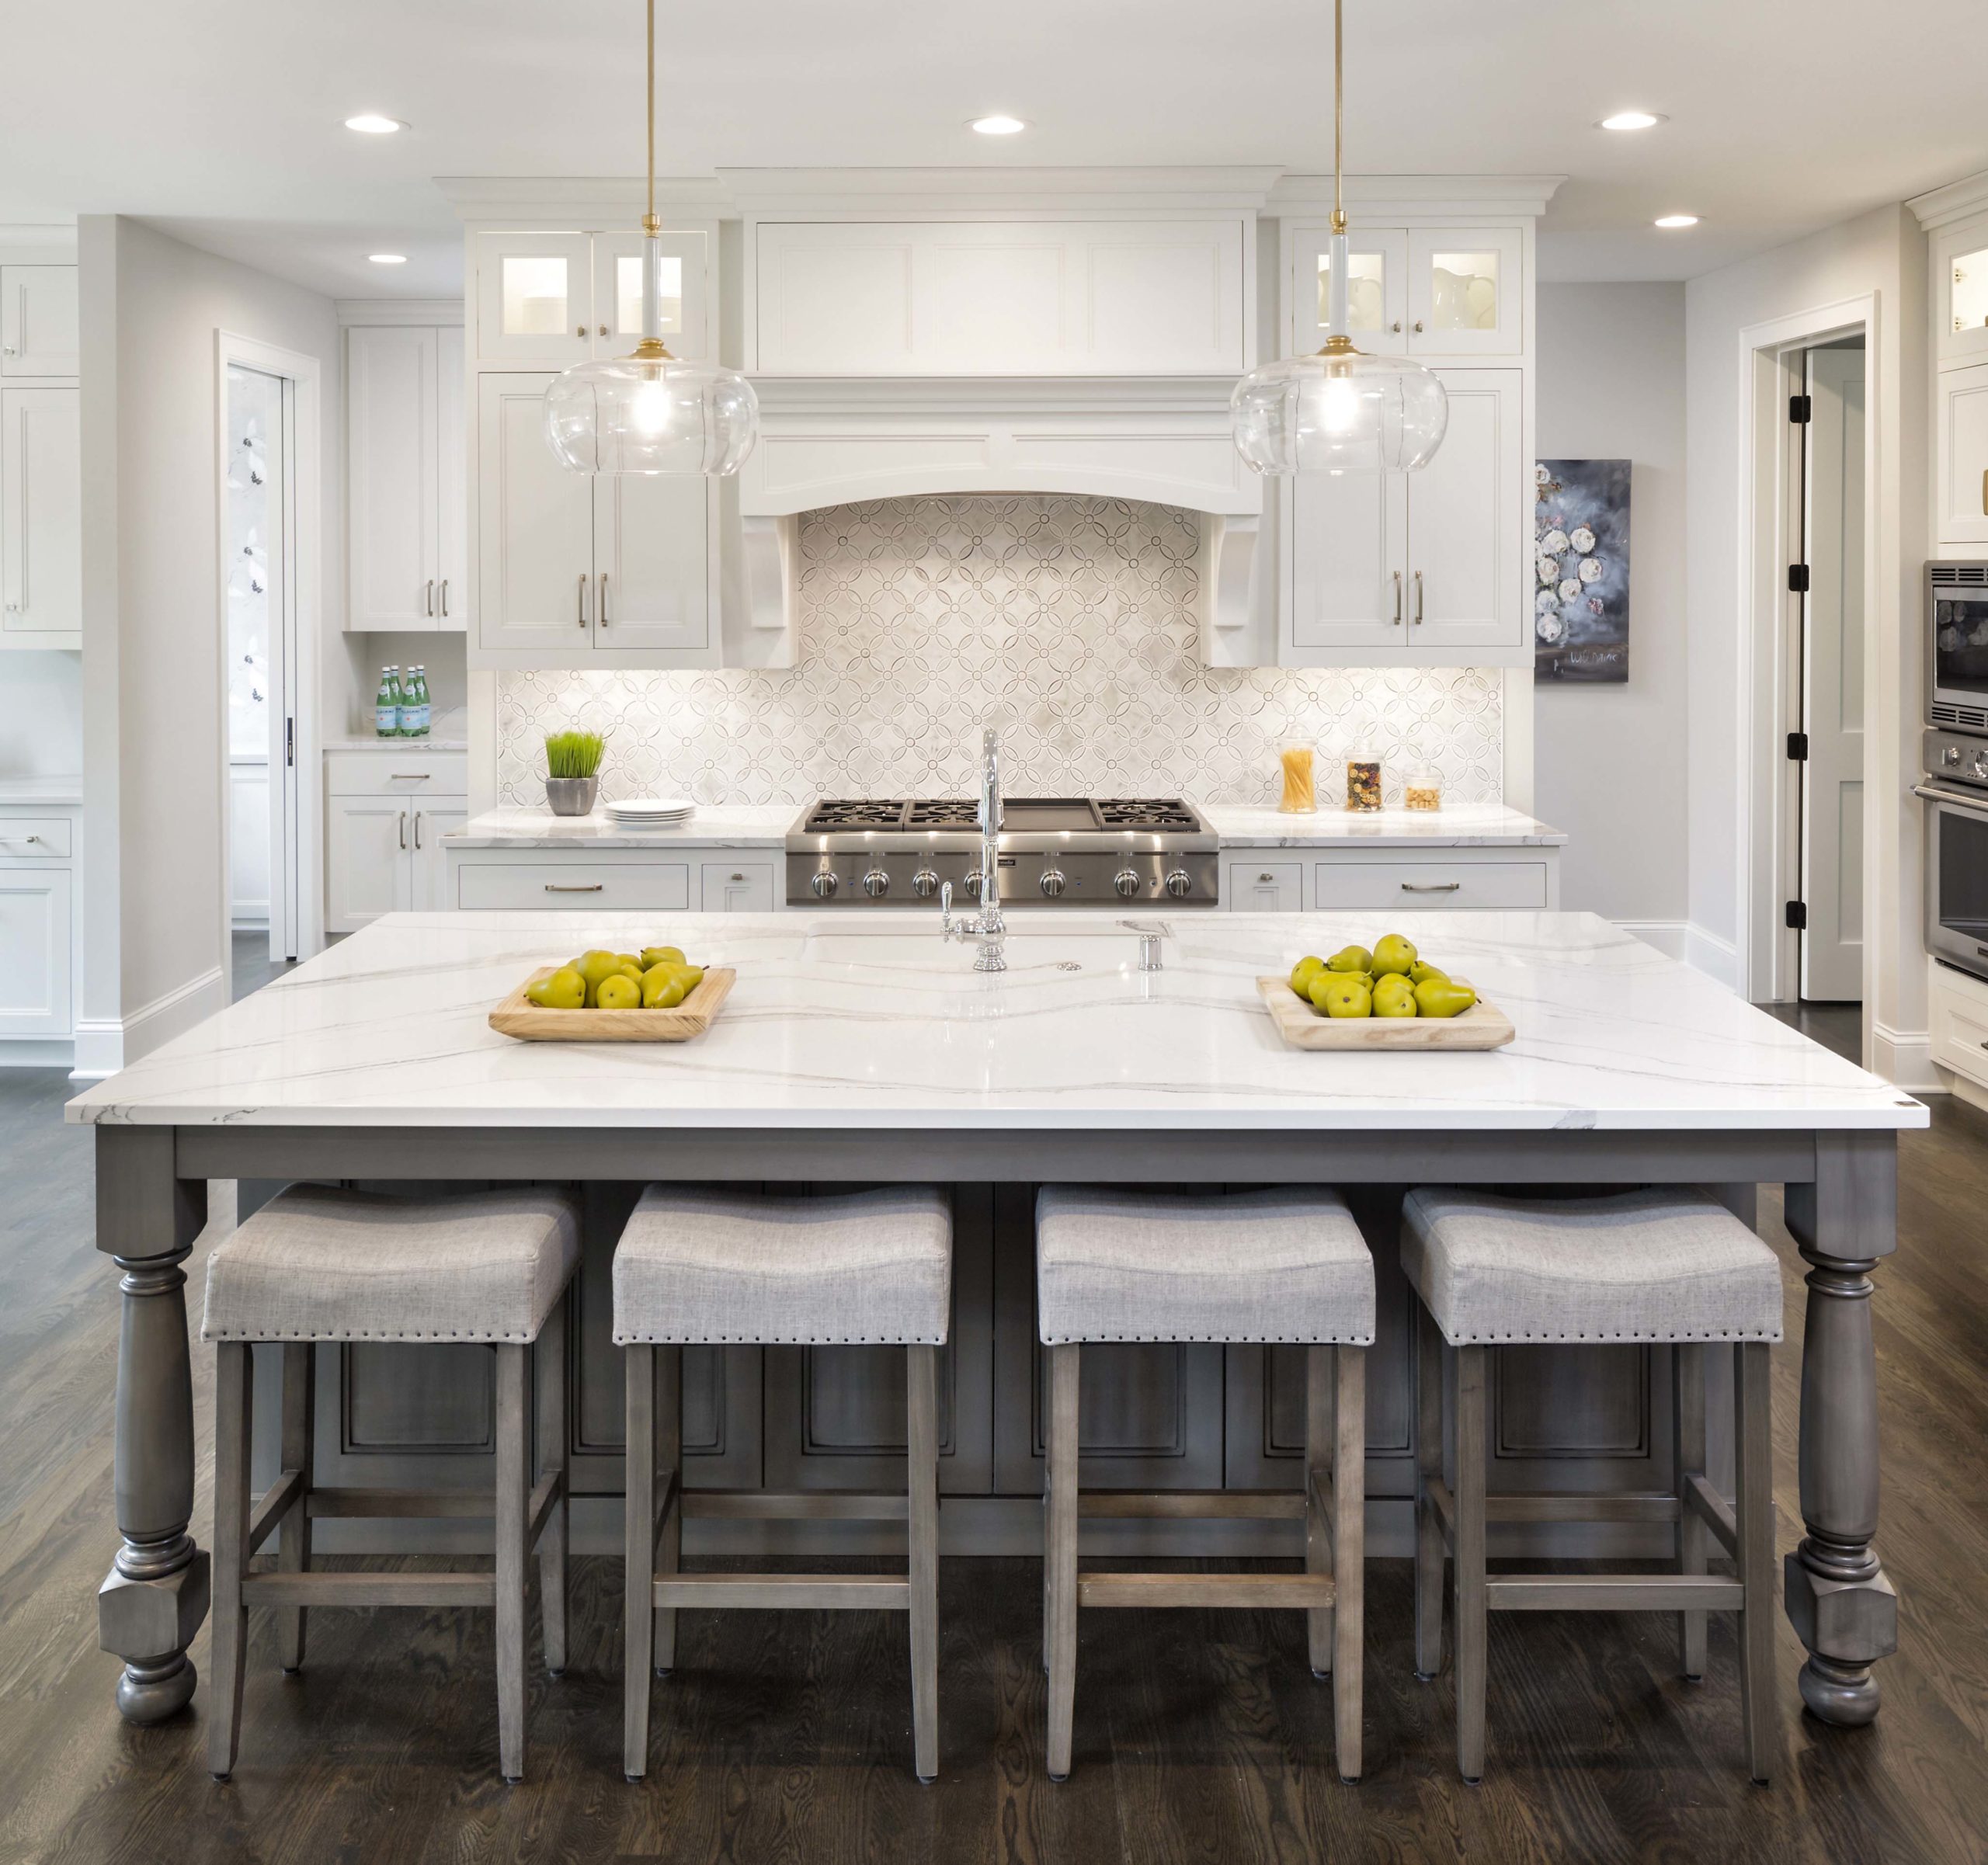 A white kitchen with a center island and stools.